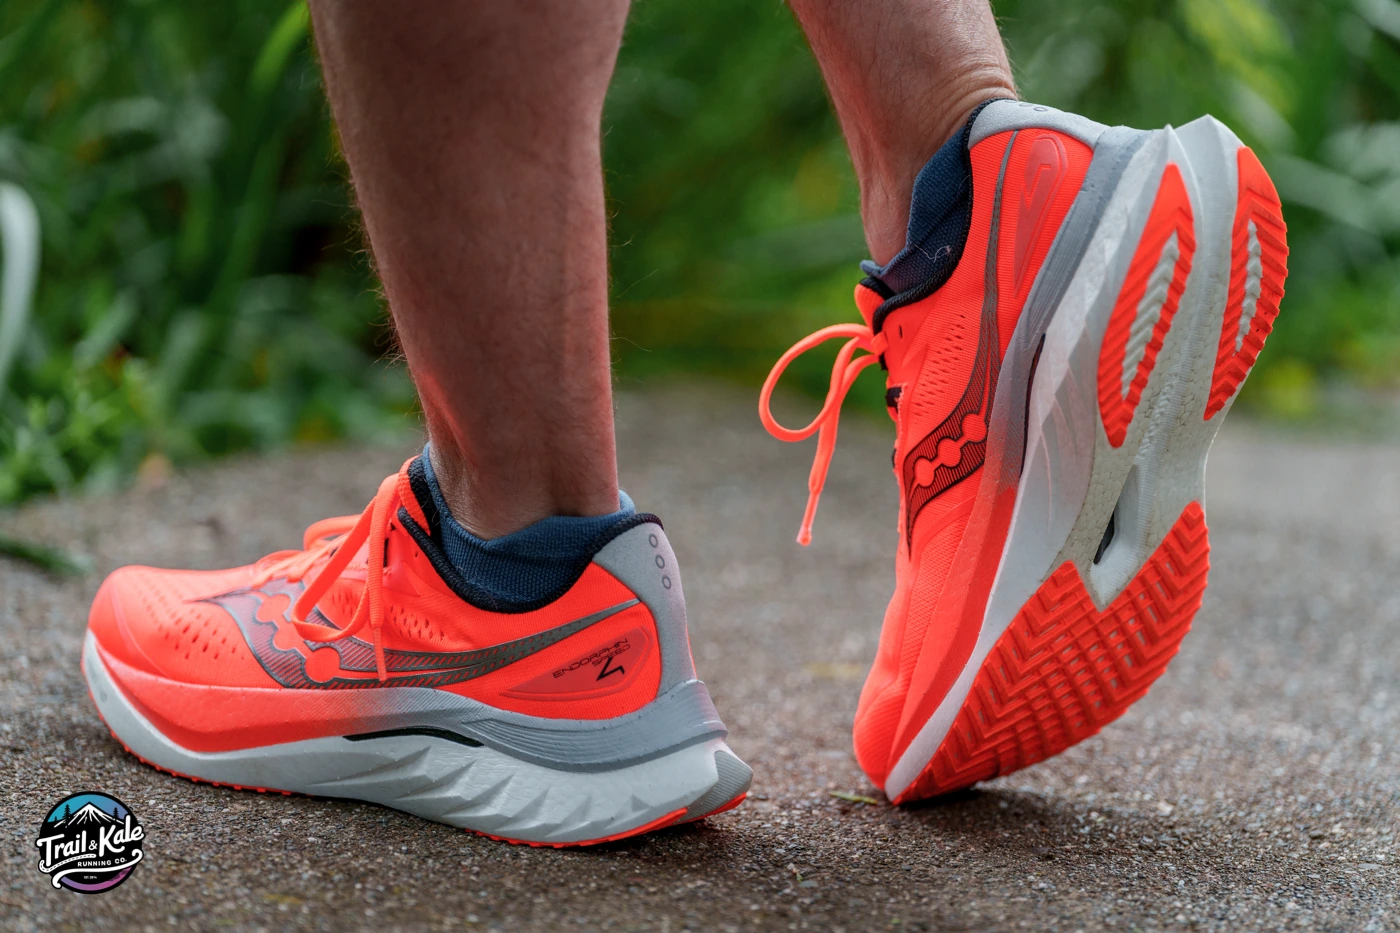 Saucony Endorphin Speed 4 Review | Trail & Kale